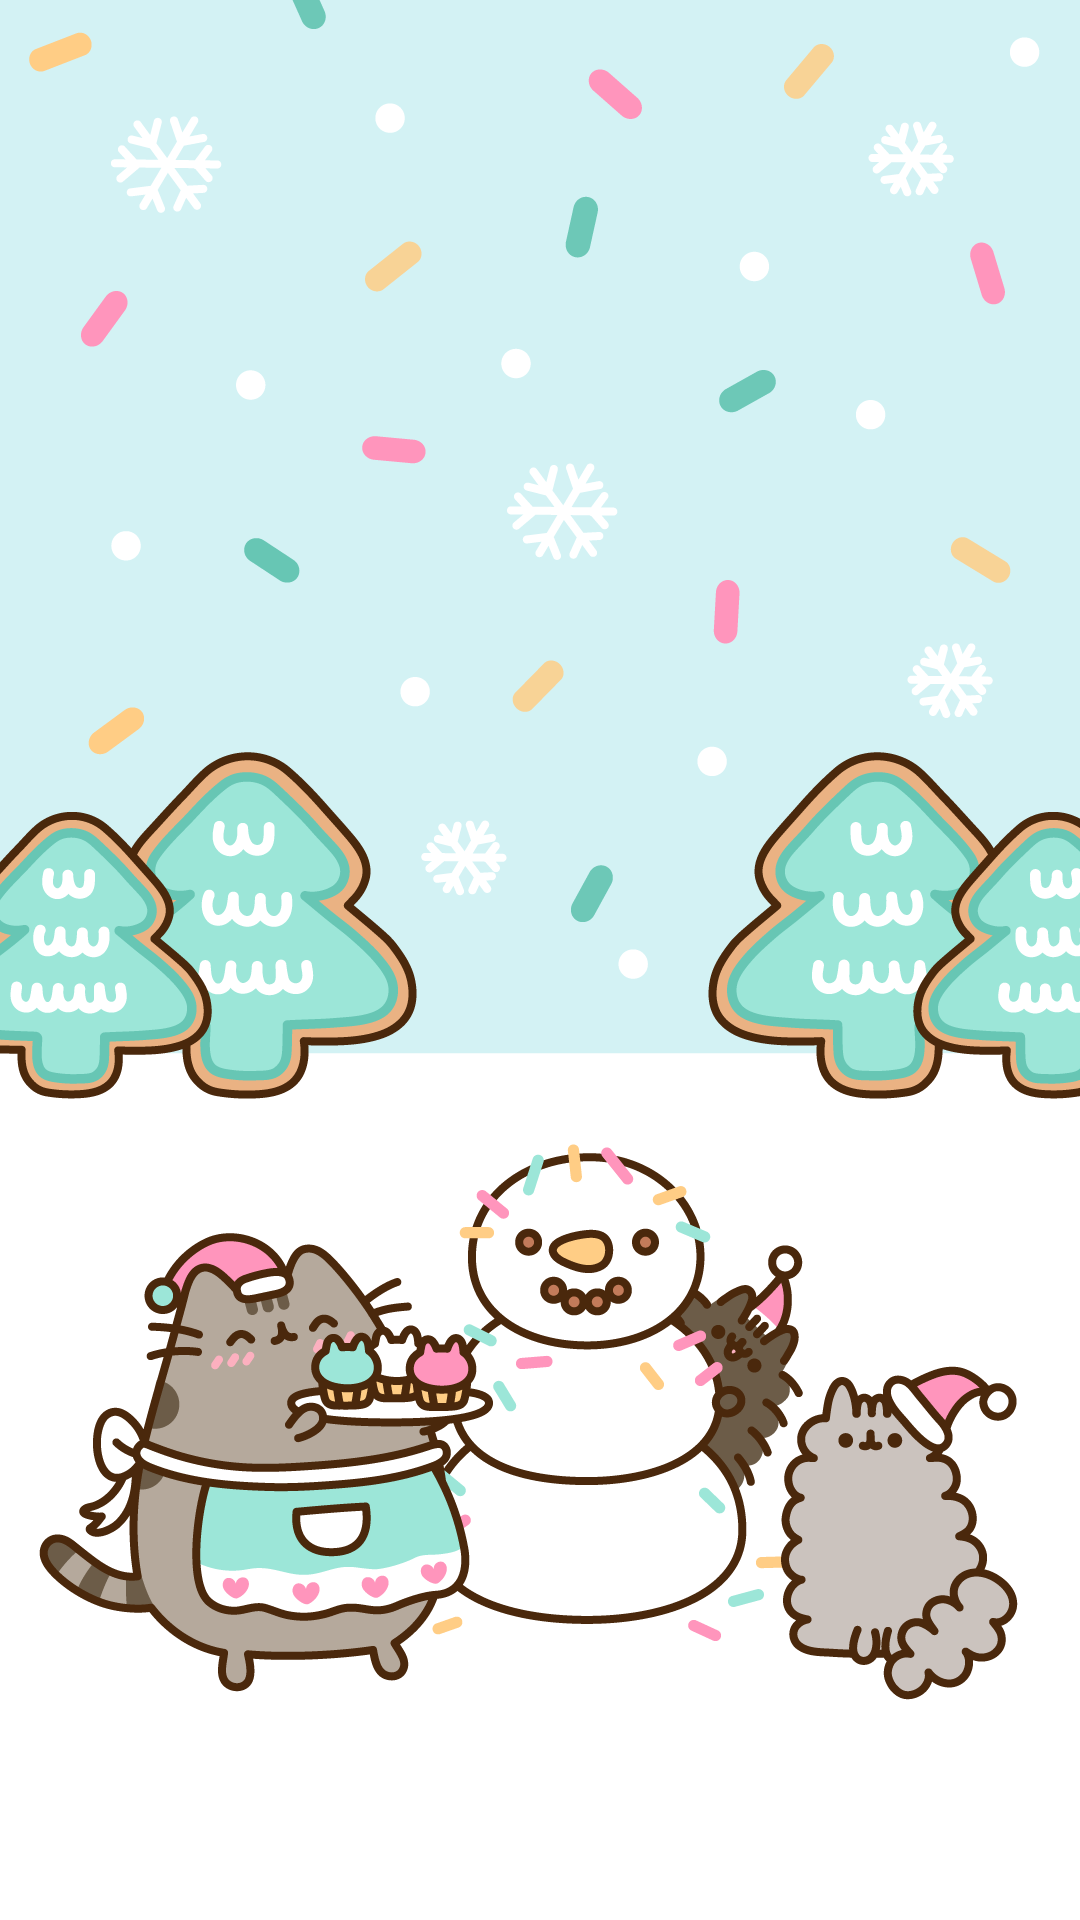 FREE Exclusive Pusheen Android and iPhone® Christmas Wallpaper - #ClairesBlog. Wallpaper iphone christmas, Pusheen christmas, Cute christmas wallpaper